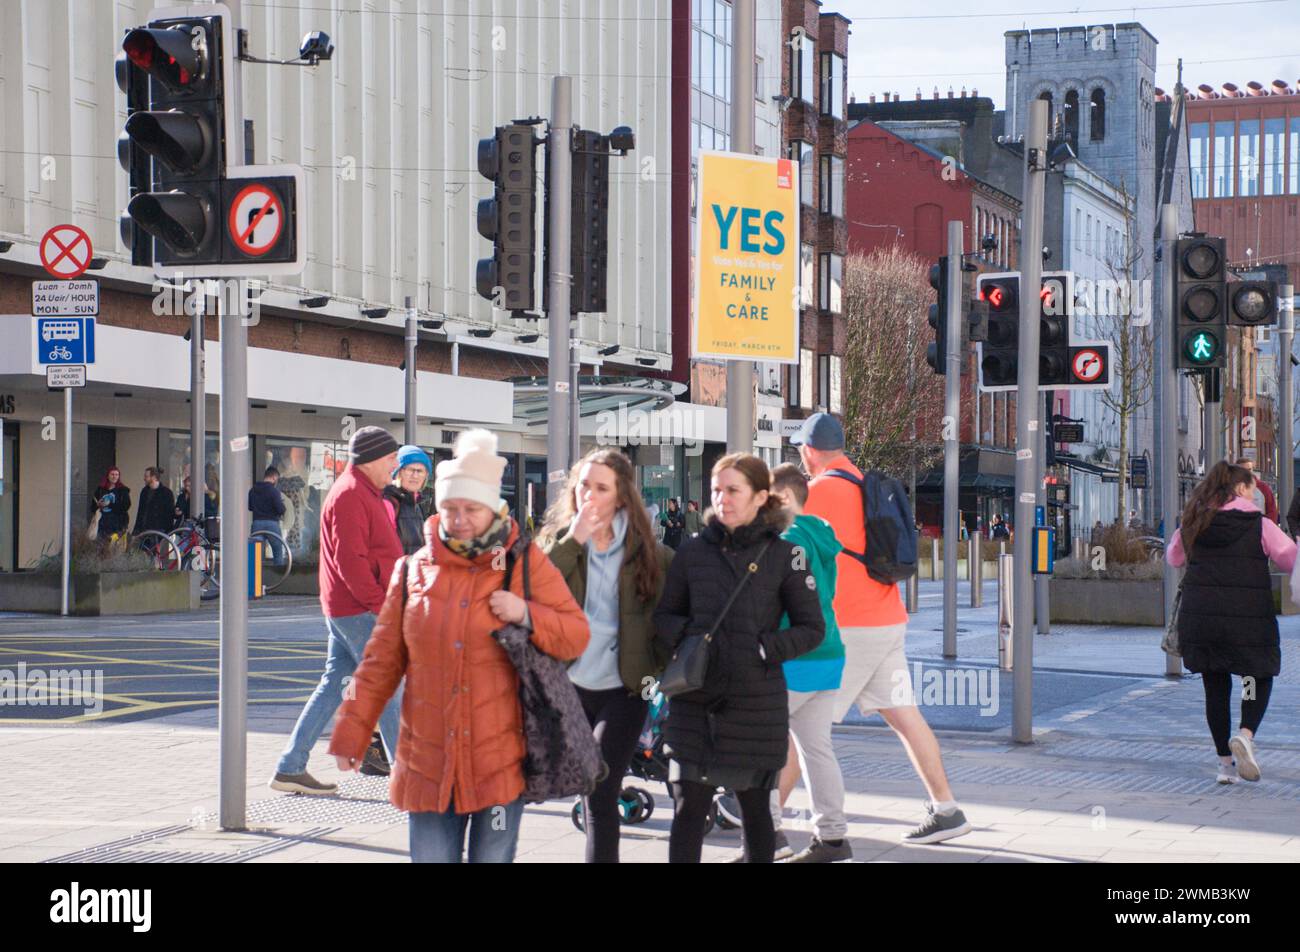 Limerick city, Ireland. Ahead of Family and Care Referendums posters in Limerick city centre calling for two Yes votes in the upcoming referendums on Family and Care on March 8th. Credit: Karlis Dzjamko/Alamy Live News Stock Photo